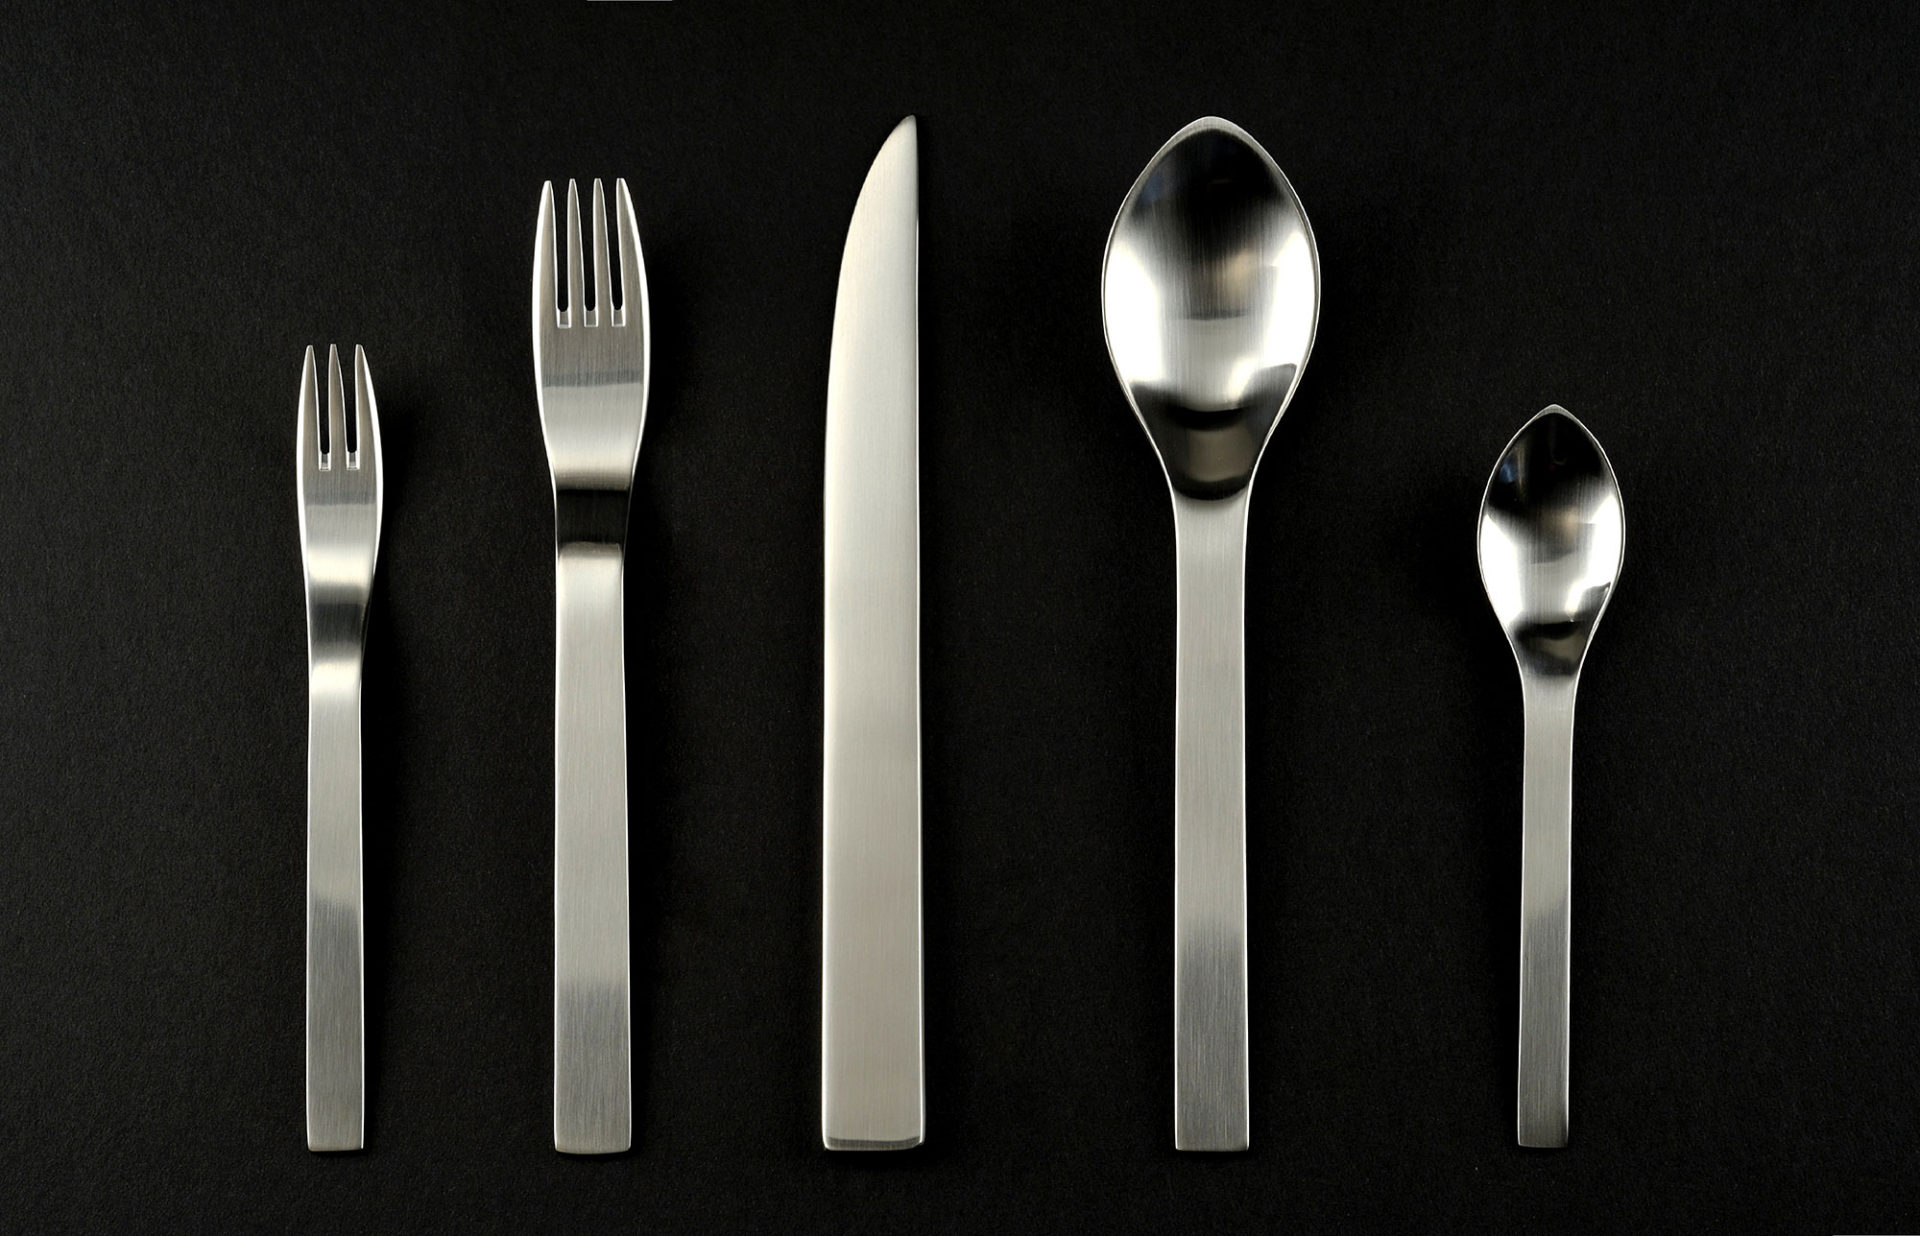 Set of steel flatware. Small and large forks, a knife, and small and large spoons.